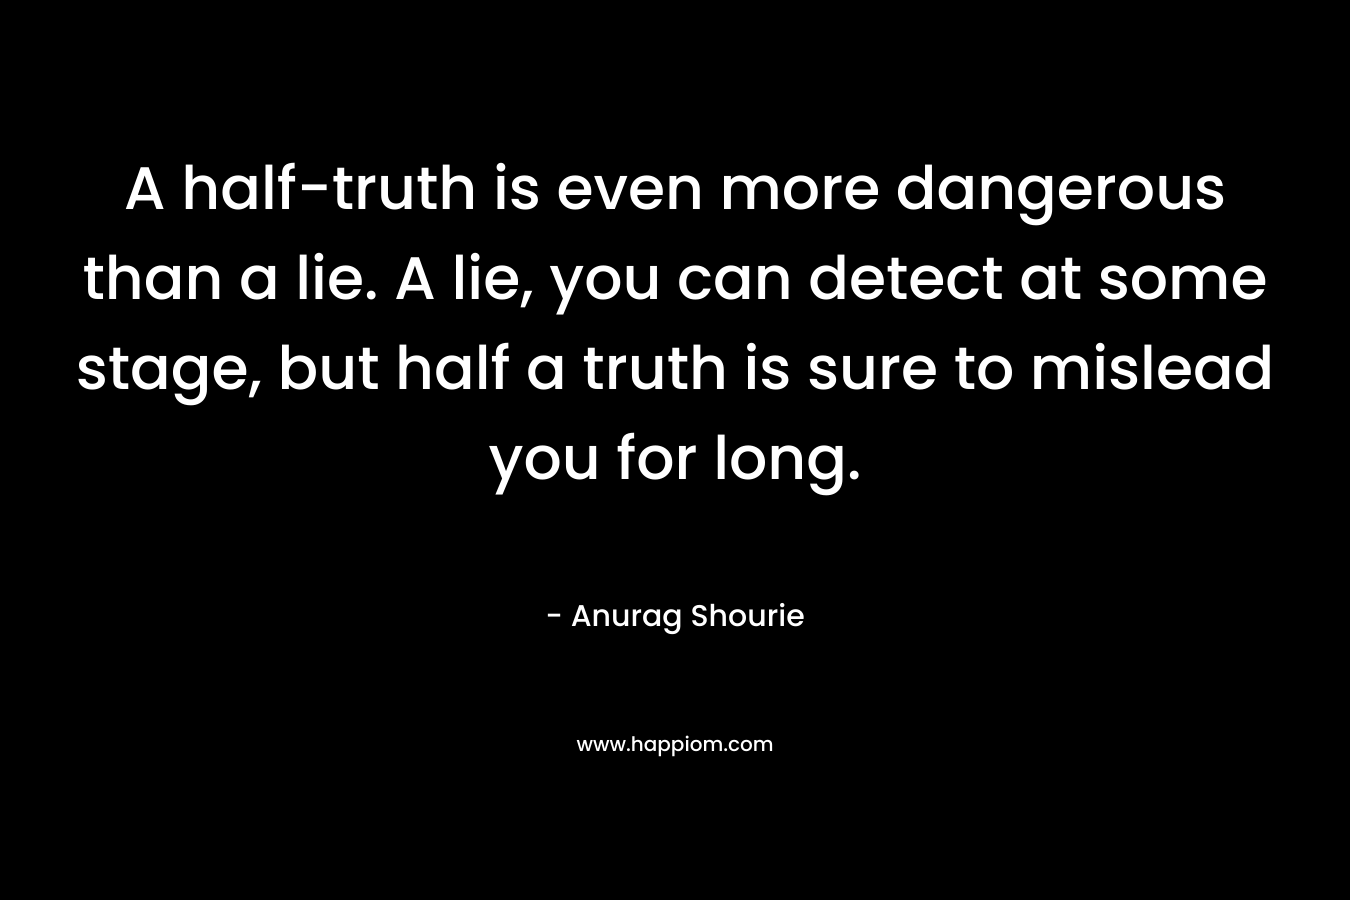 A half-truth is even more dangerous than a lie. A lie, you can detect at some stage, but half a truth is sure to mislead you for long.